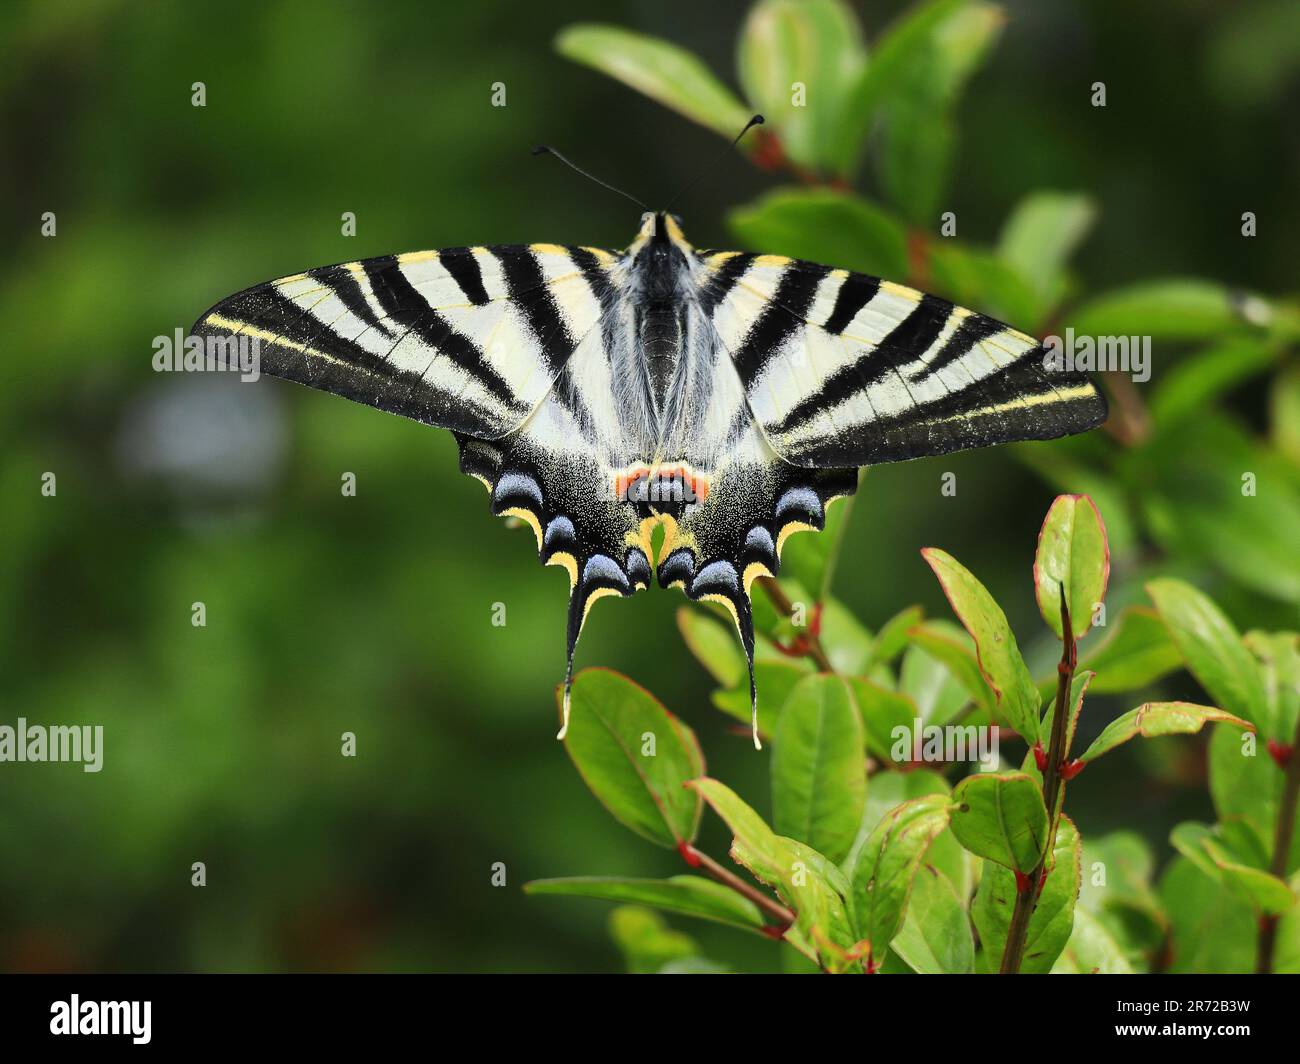 Scarce Swallowtail - Iphiclides podalirius. Sighted Oeiras, Portugal. Overwing view. Perched on a young pomegranate tree. Stock Photo